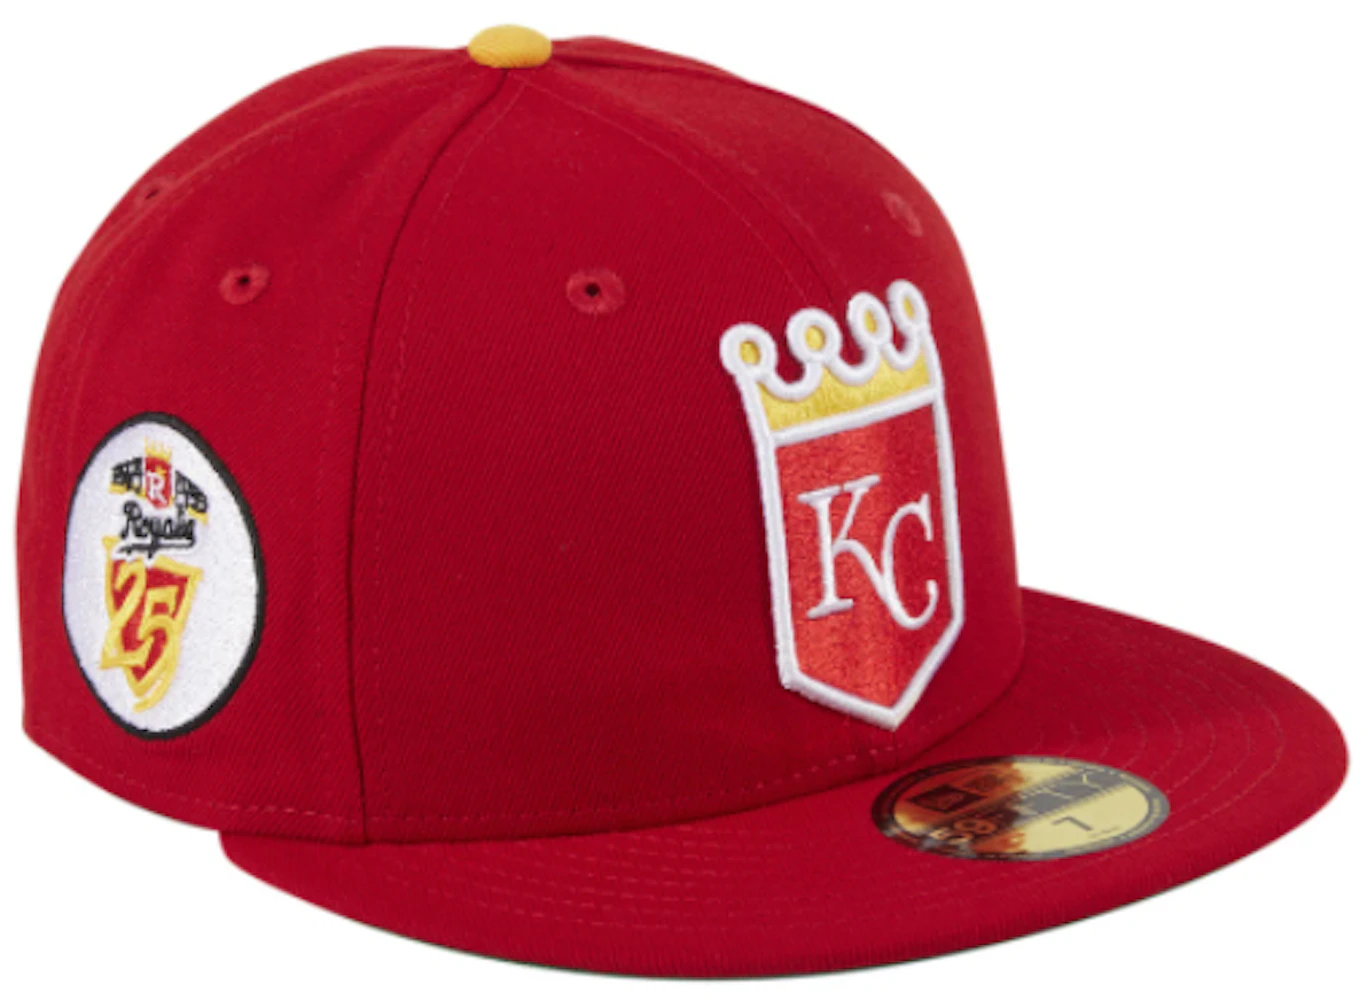 Men's Kansas City Royals New Era Royal Gold City 59FIFTY Fitted Hat